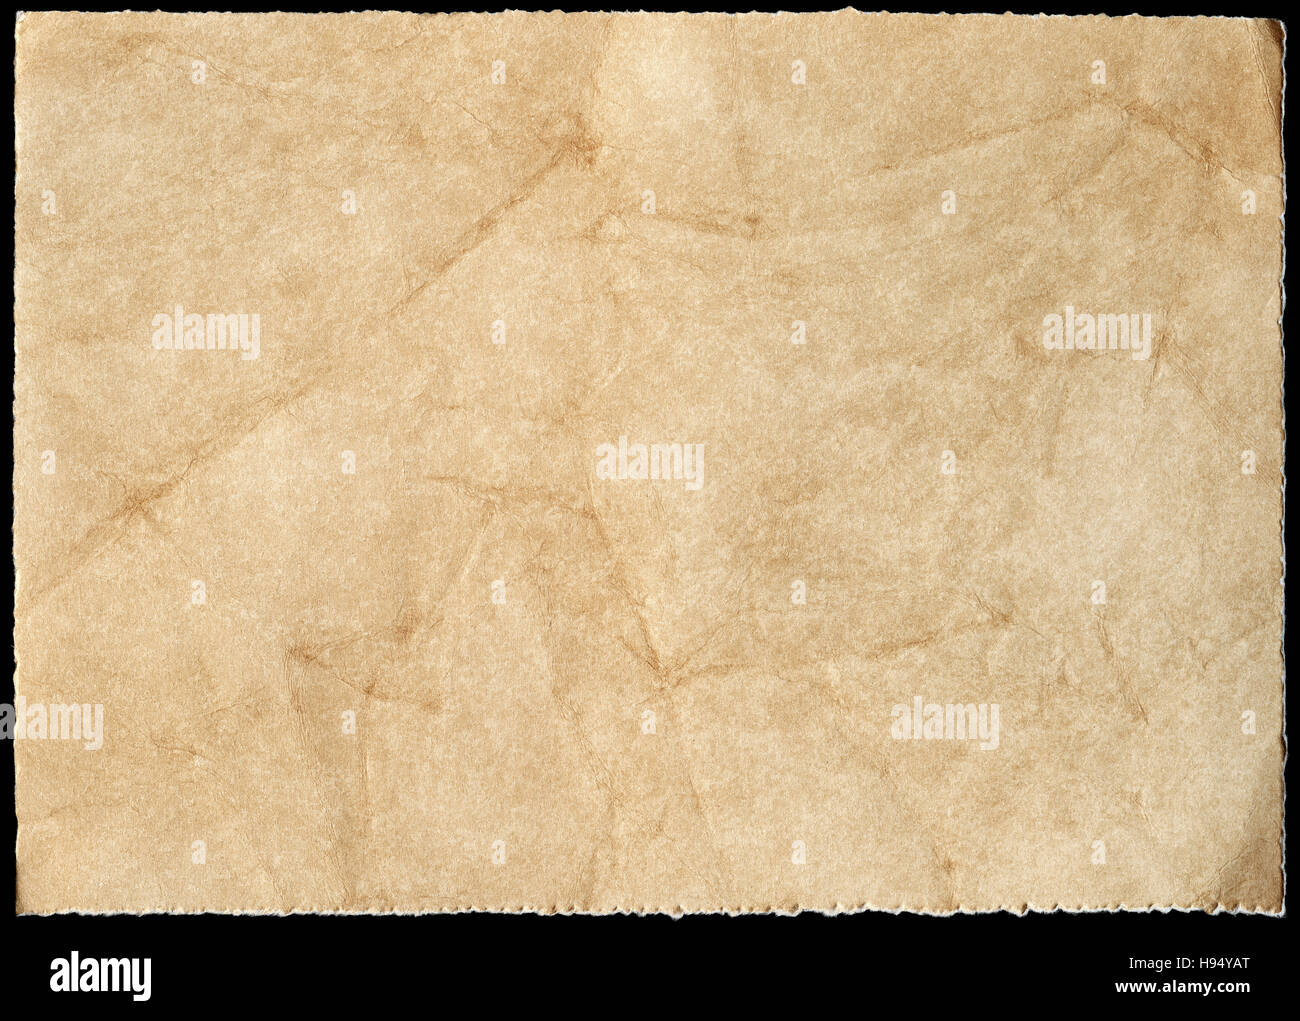 Old stained paper isolated on a black background. Stock Photo